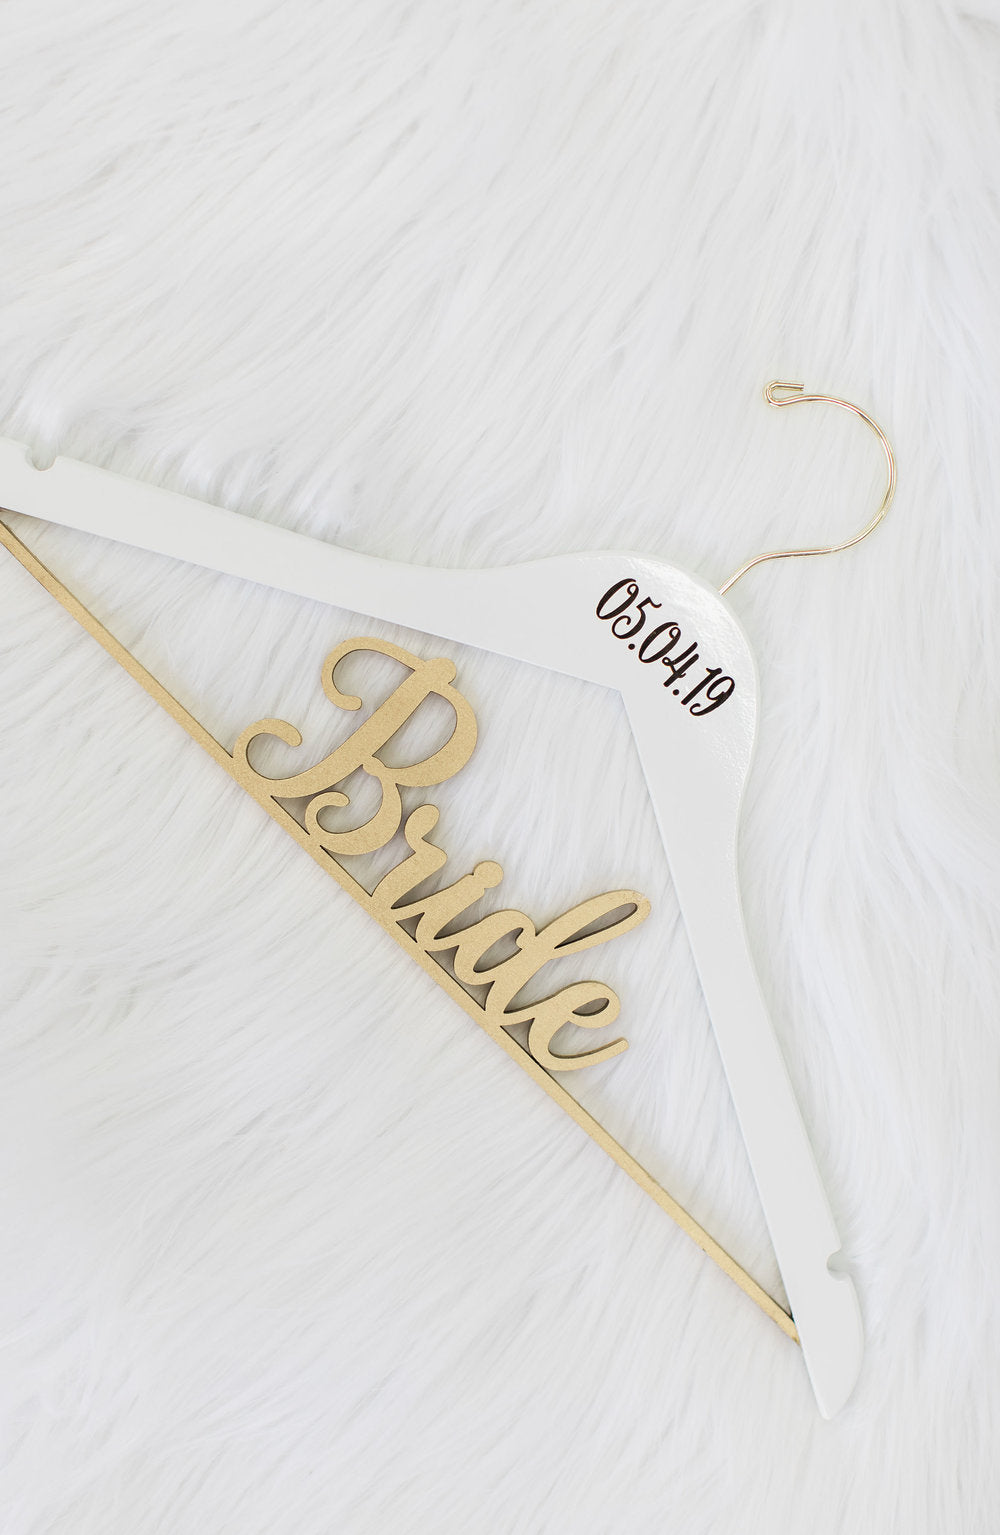 Personalized Wood Name Hangers